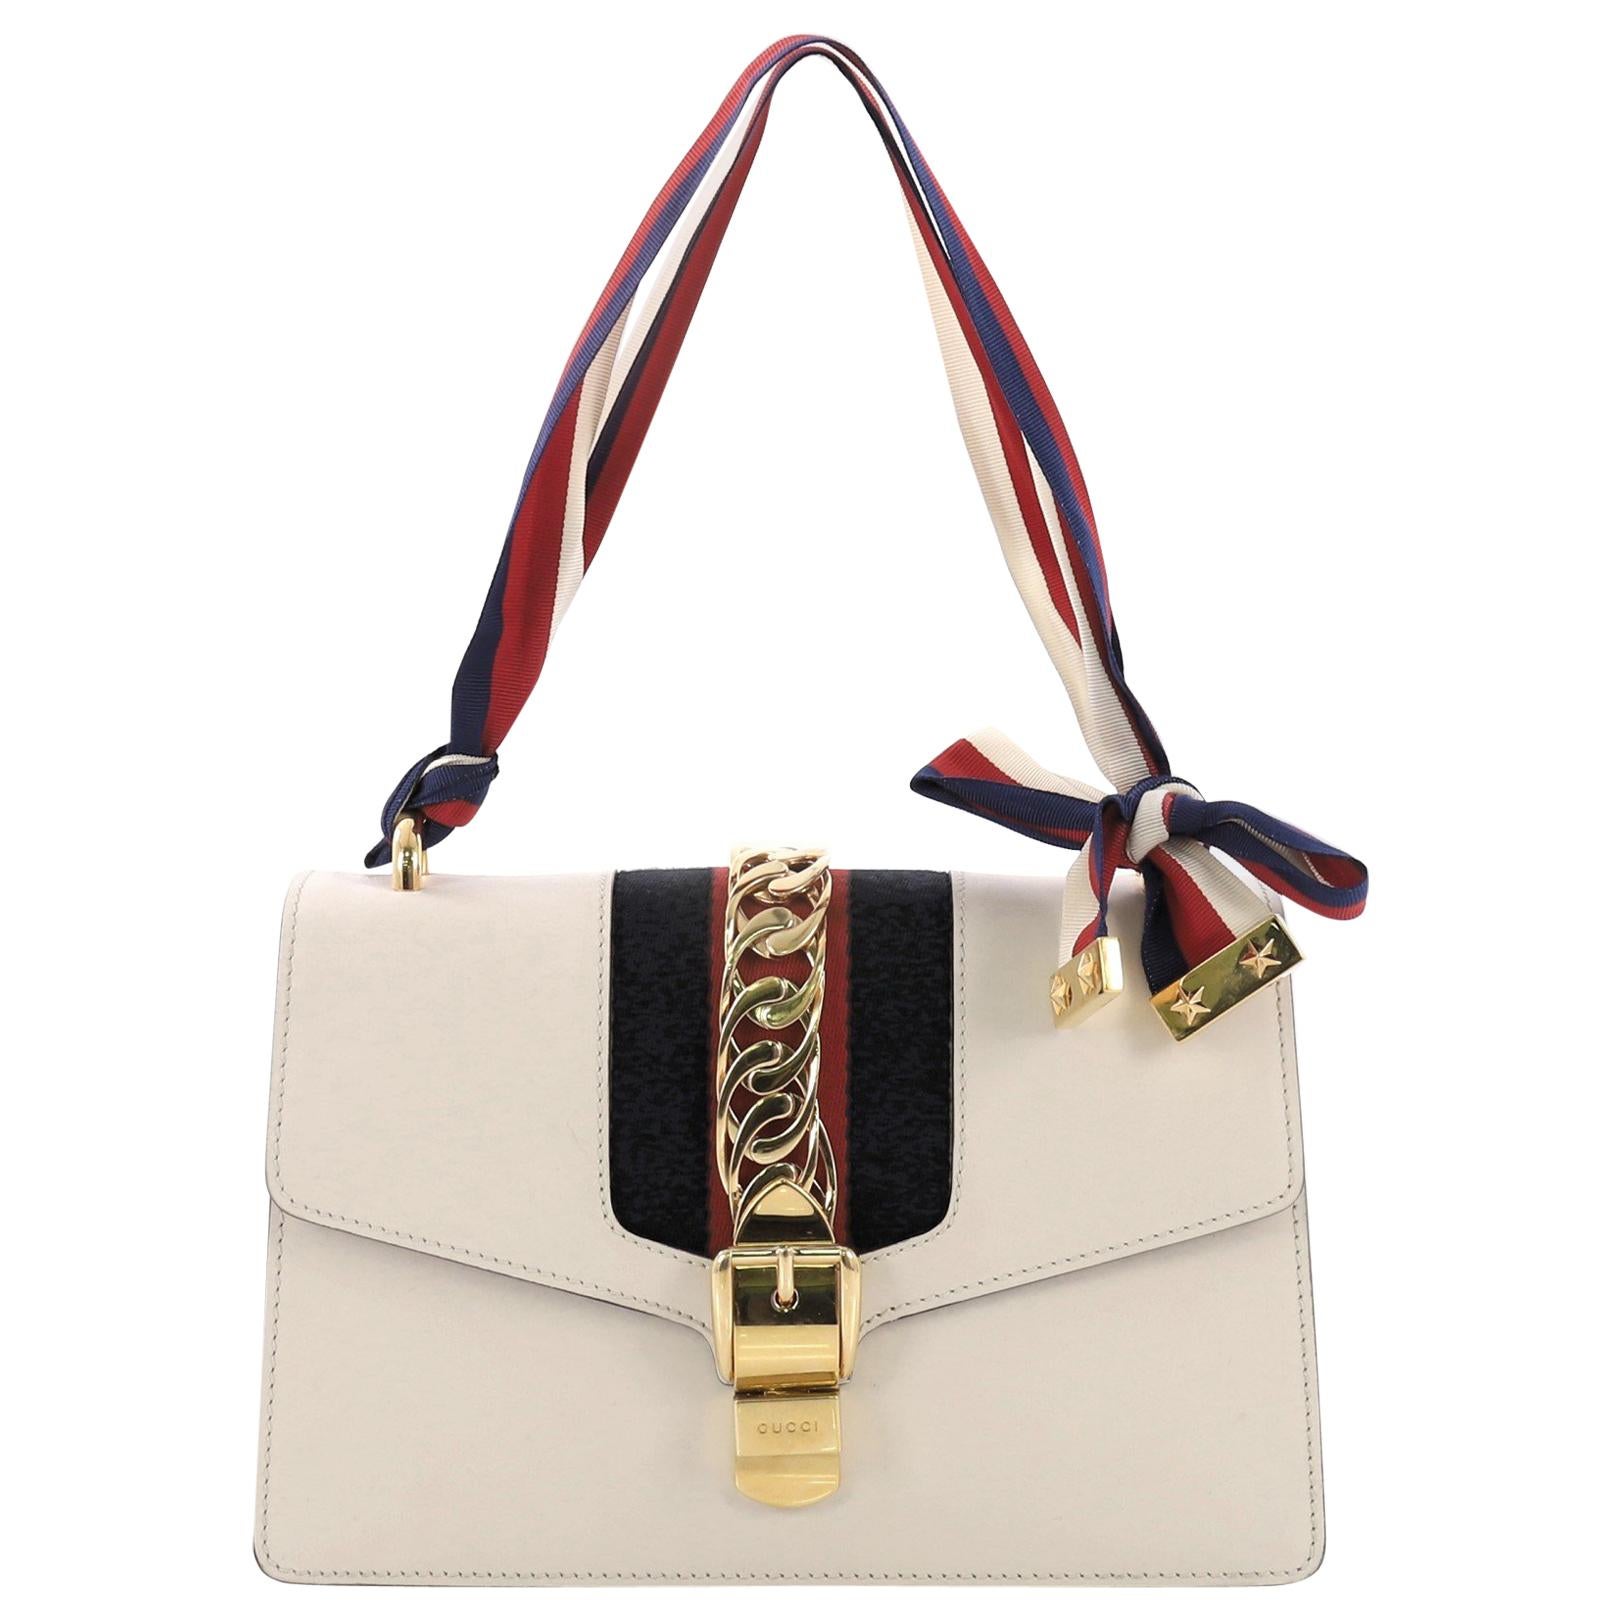 Gucci Sylvie Shoulder Bag Leather Small, crafted in off-white leather